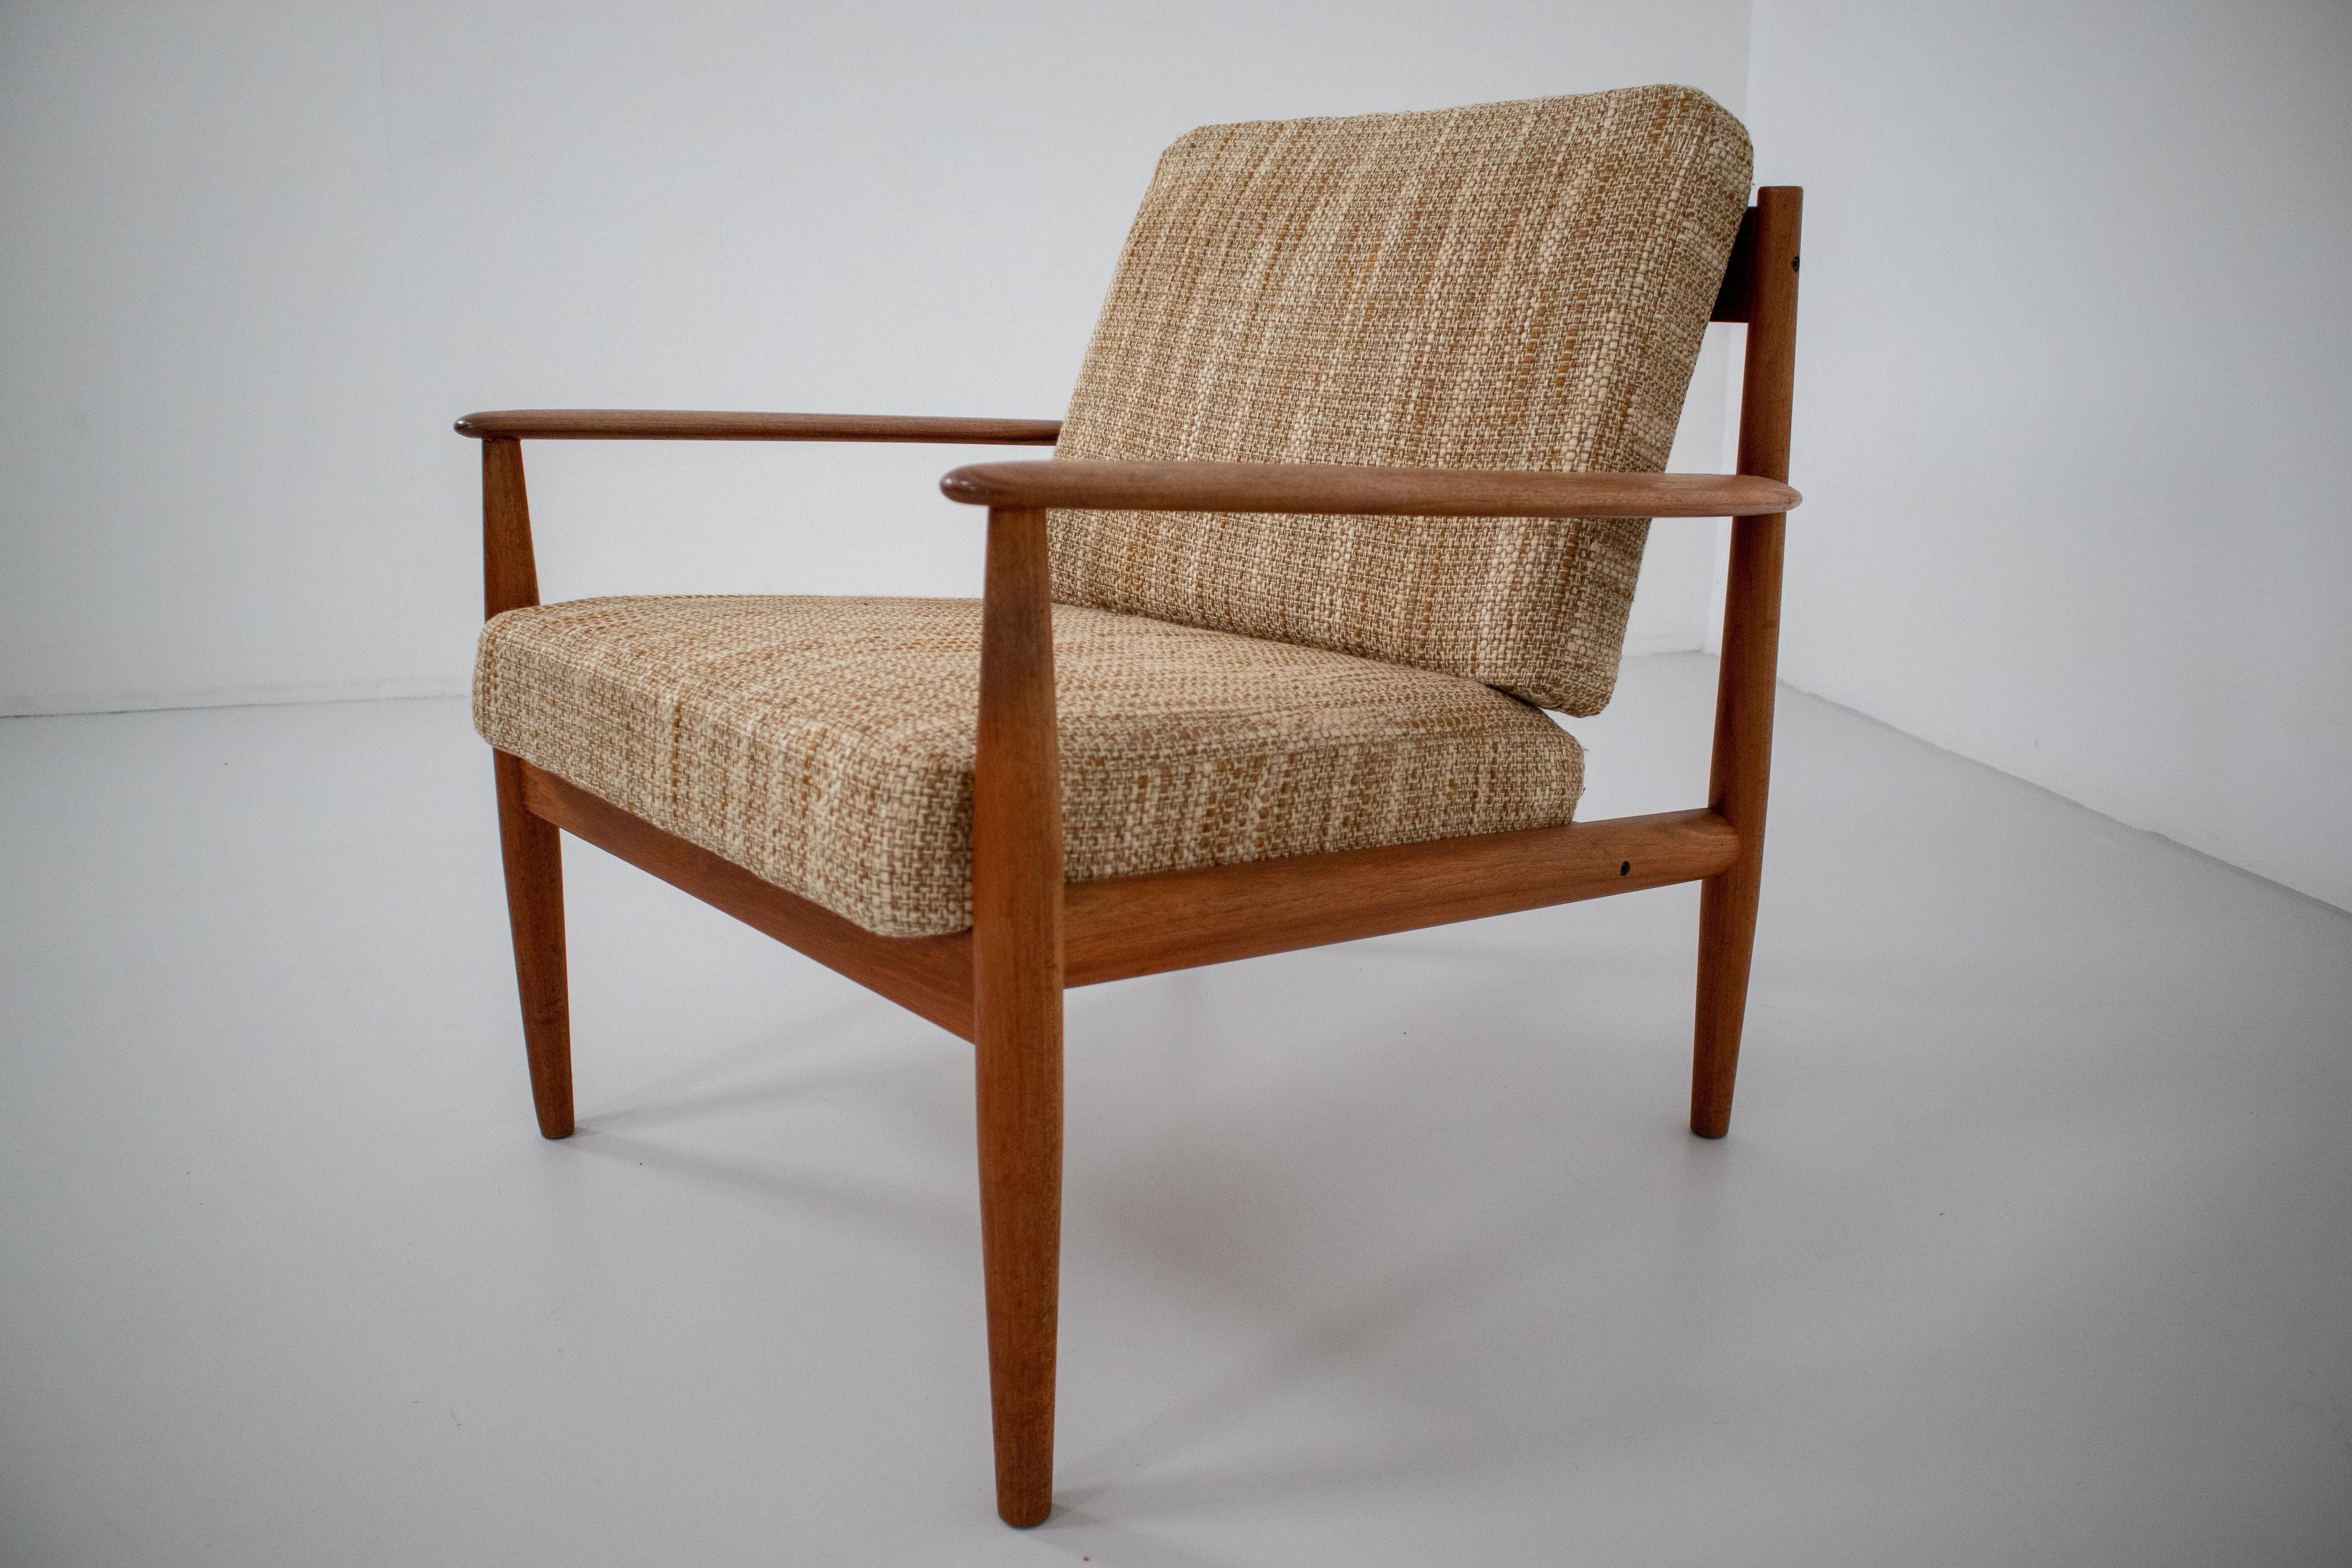 Elegant lounge chair designed by one of the few female Mid Century furniture designers, Grete Jalk, in Denmark for France & Søn c. 1960’s. Constructed of teak wood and Cushions are original and sprung, fabric also original and in very good